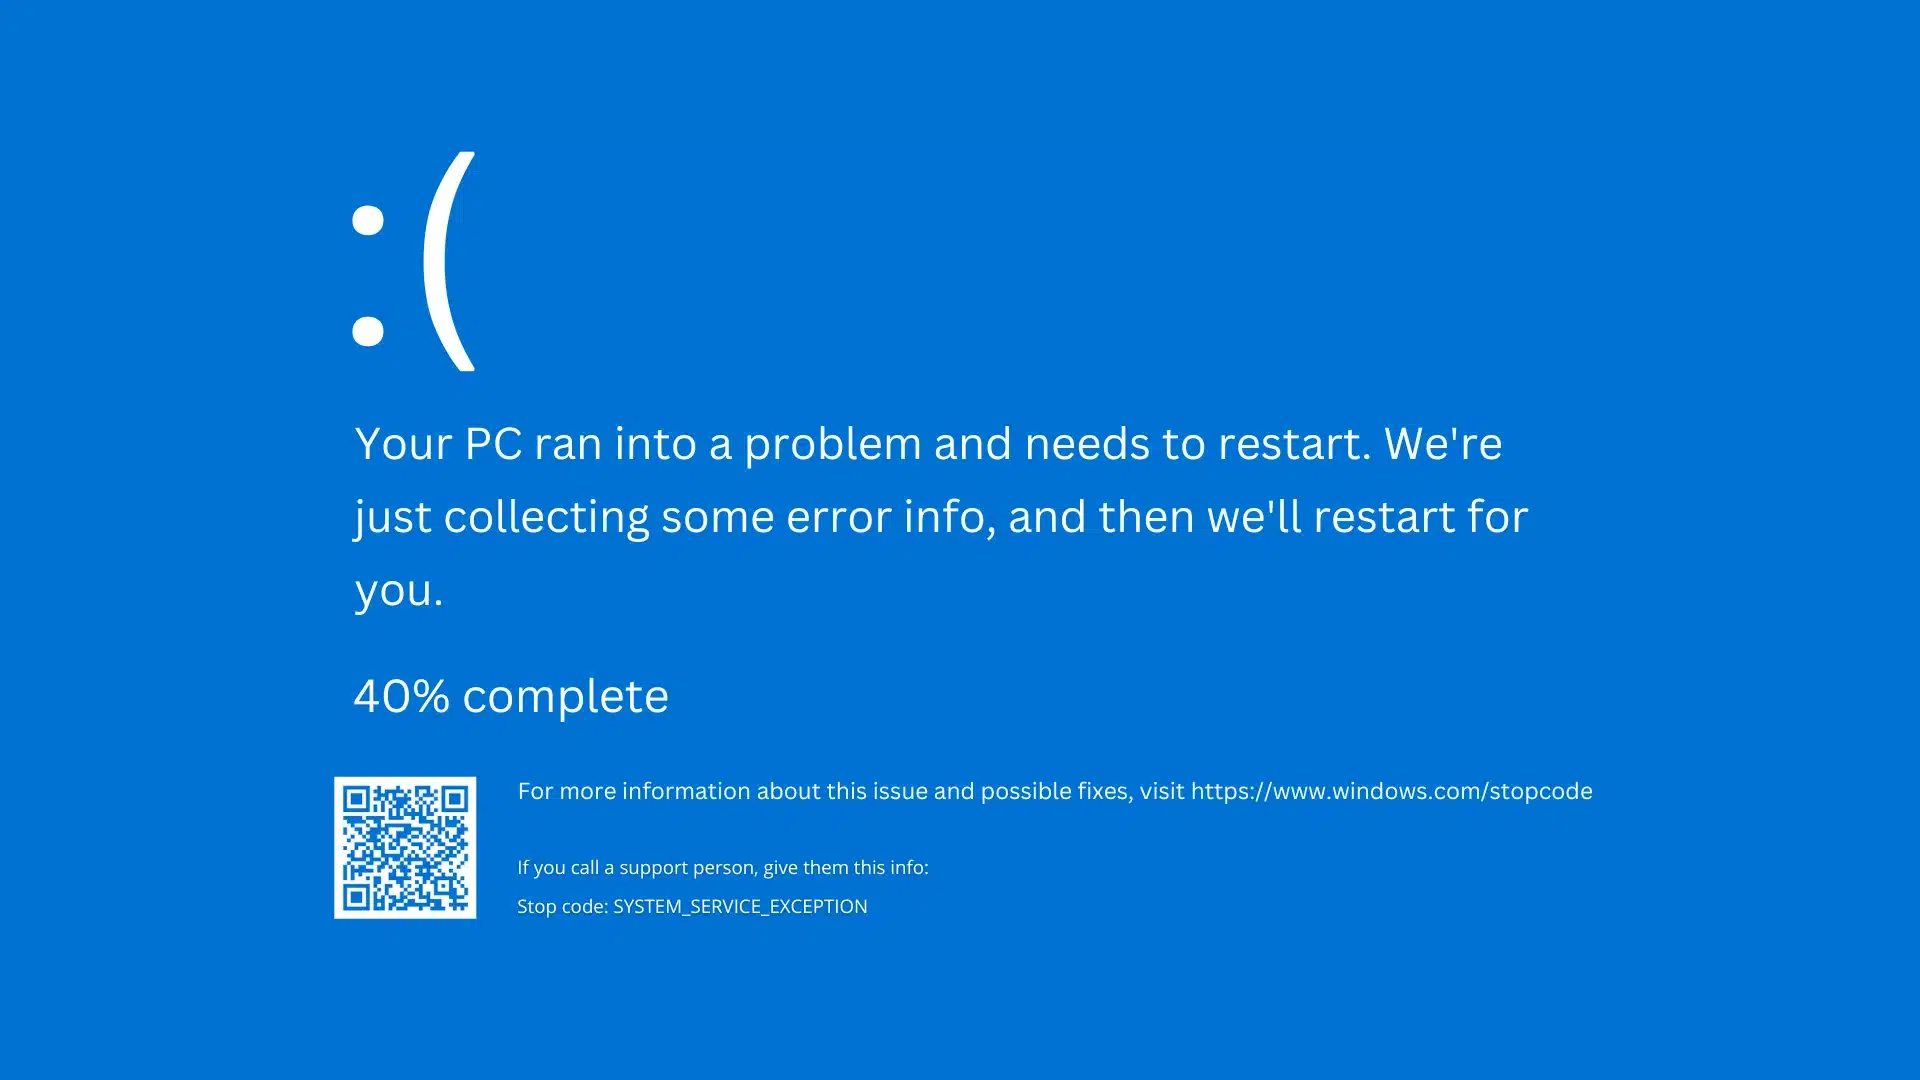 Blue Screen of Death - System Service Exception